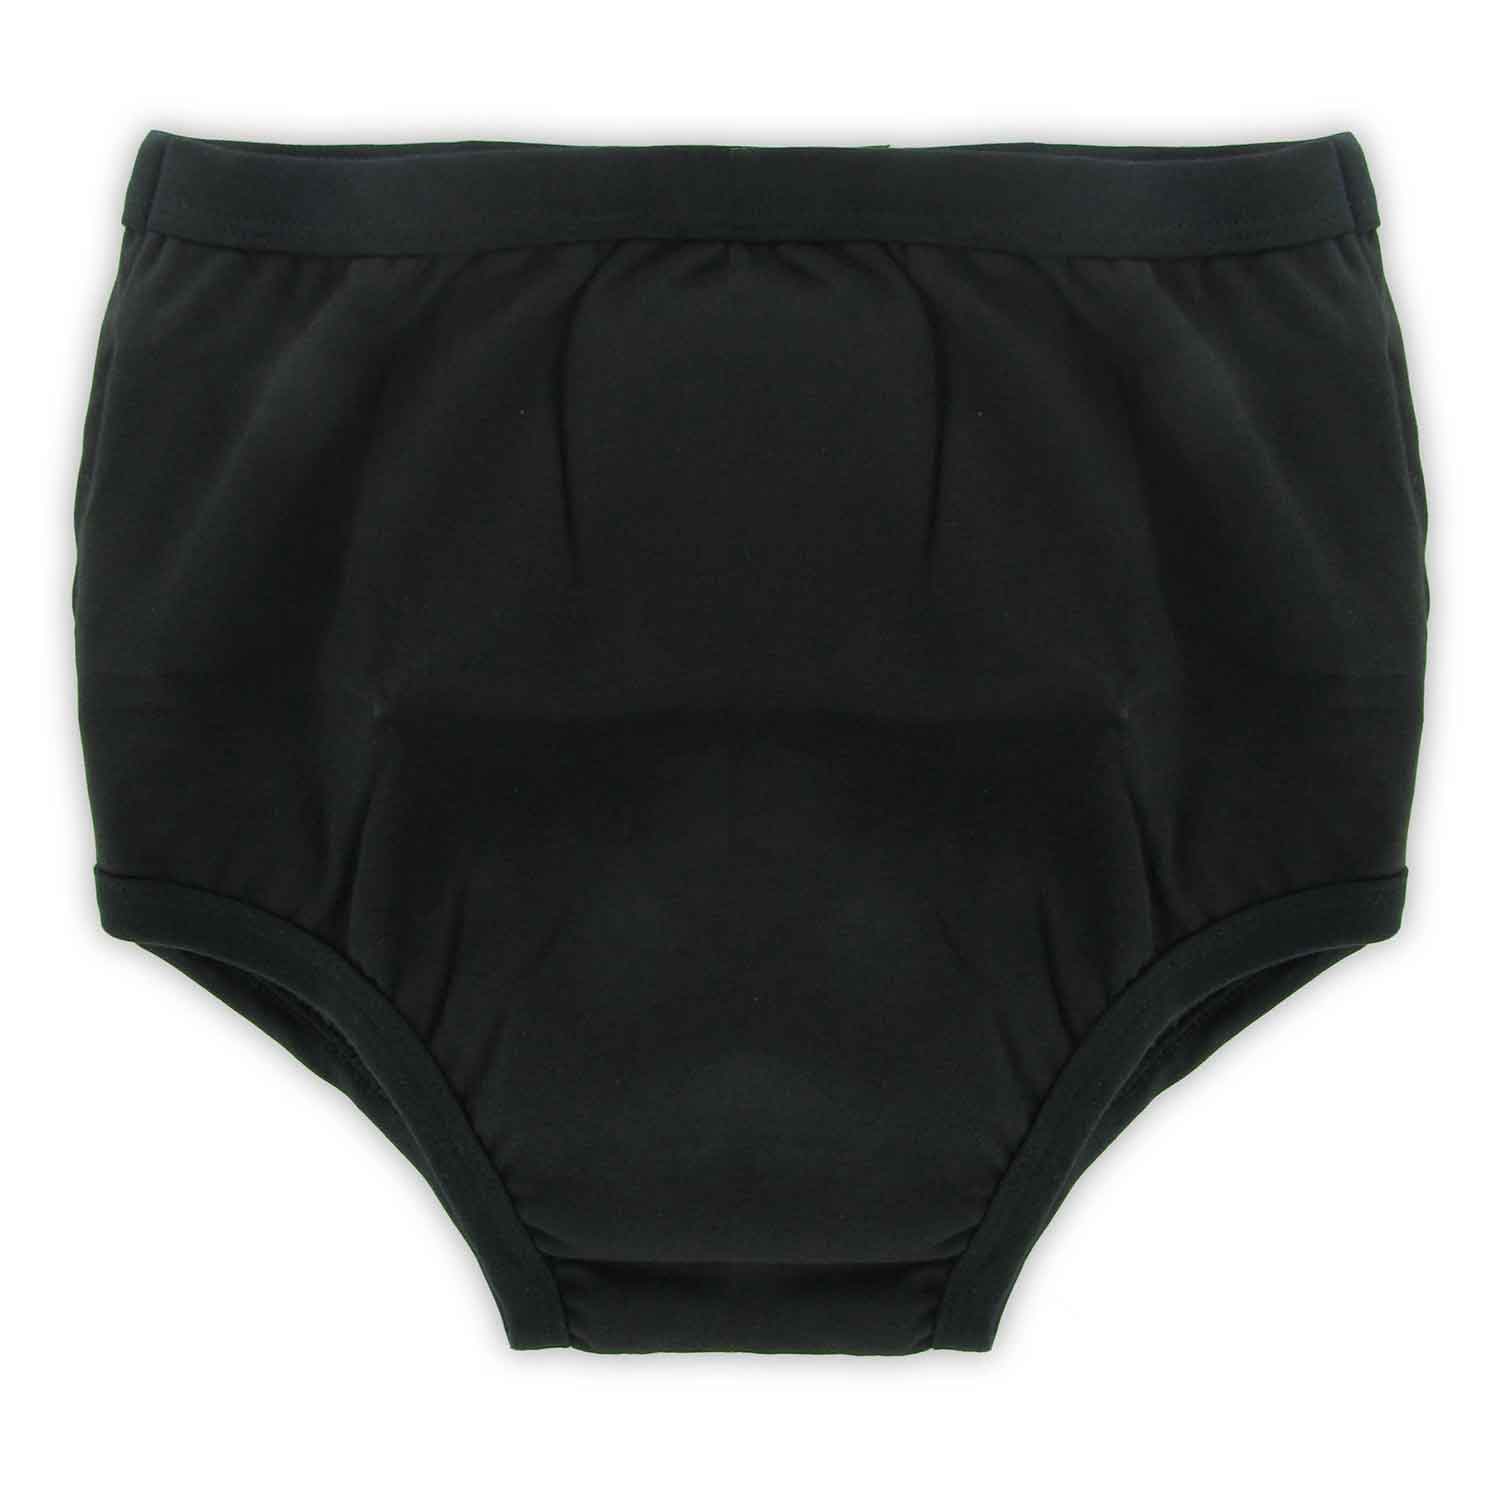 Boys Washable Absorbent Briefs: Bedwetting Store